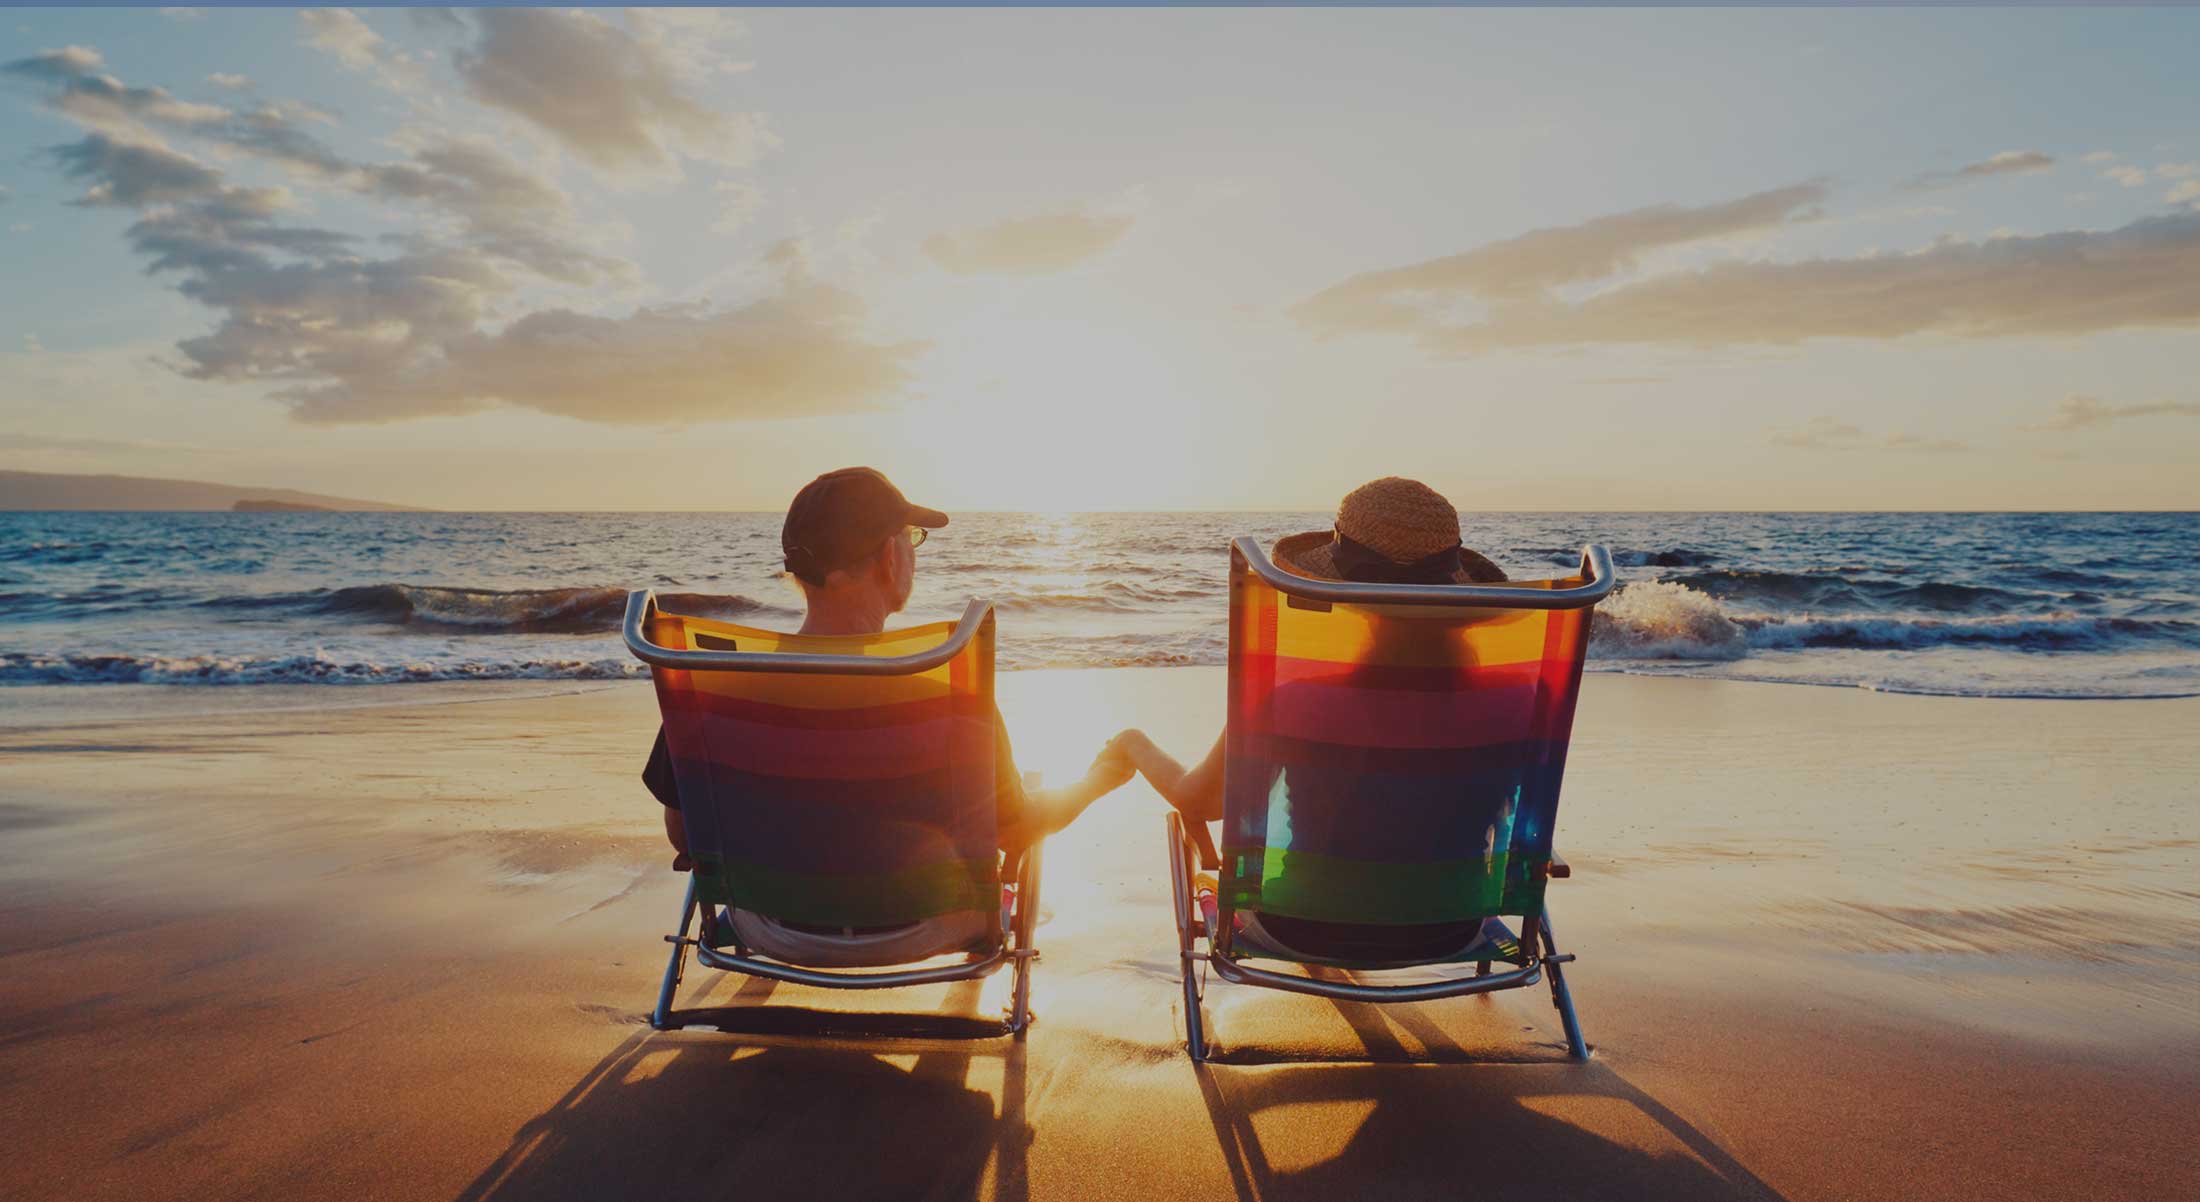 Couple sitting in beach chairs looking over ocean with sun rising.